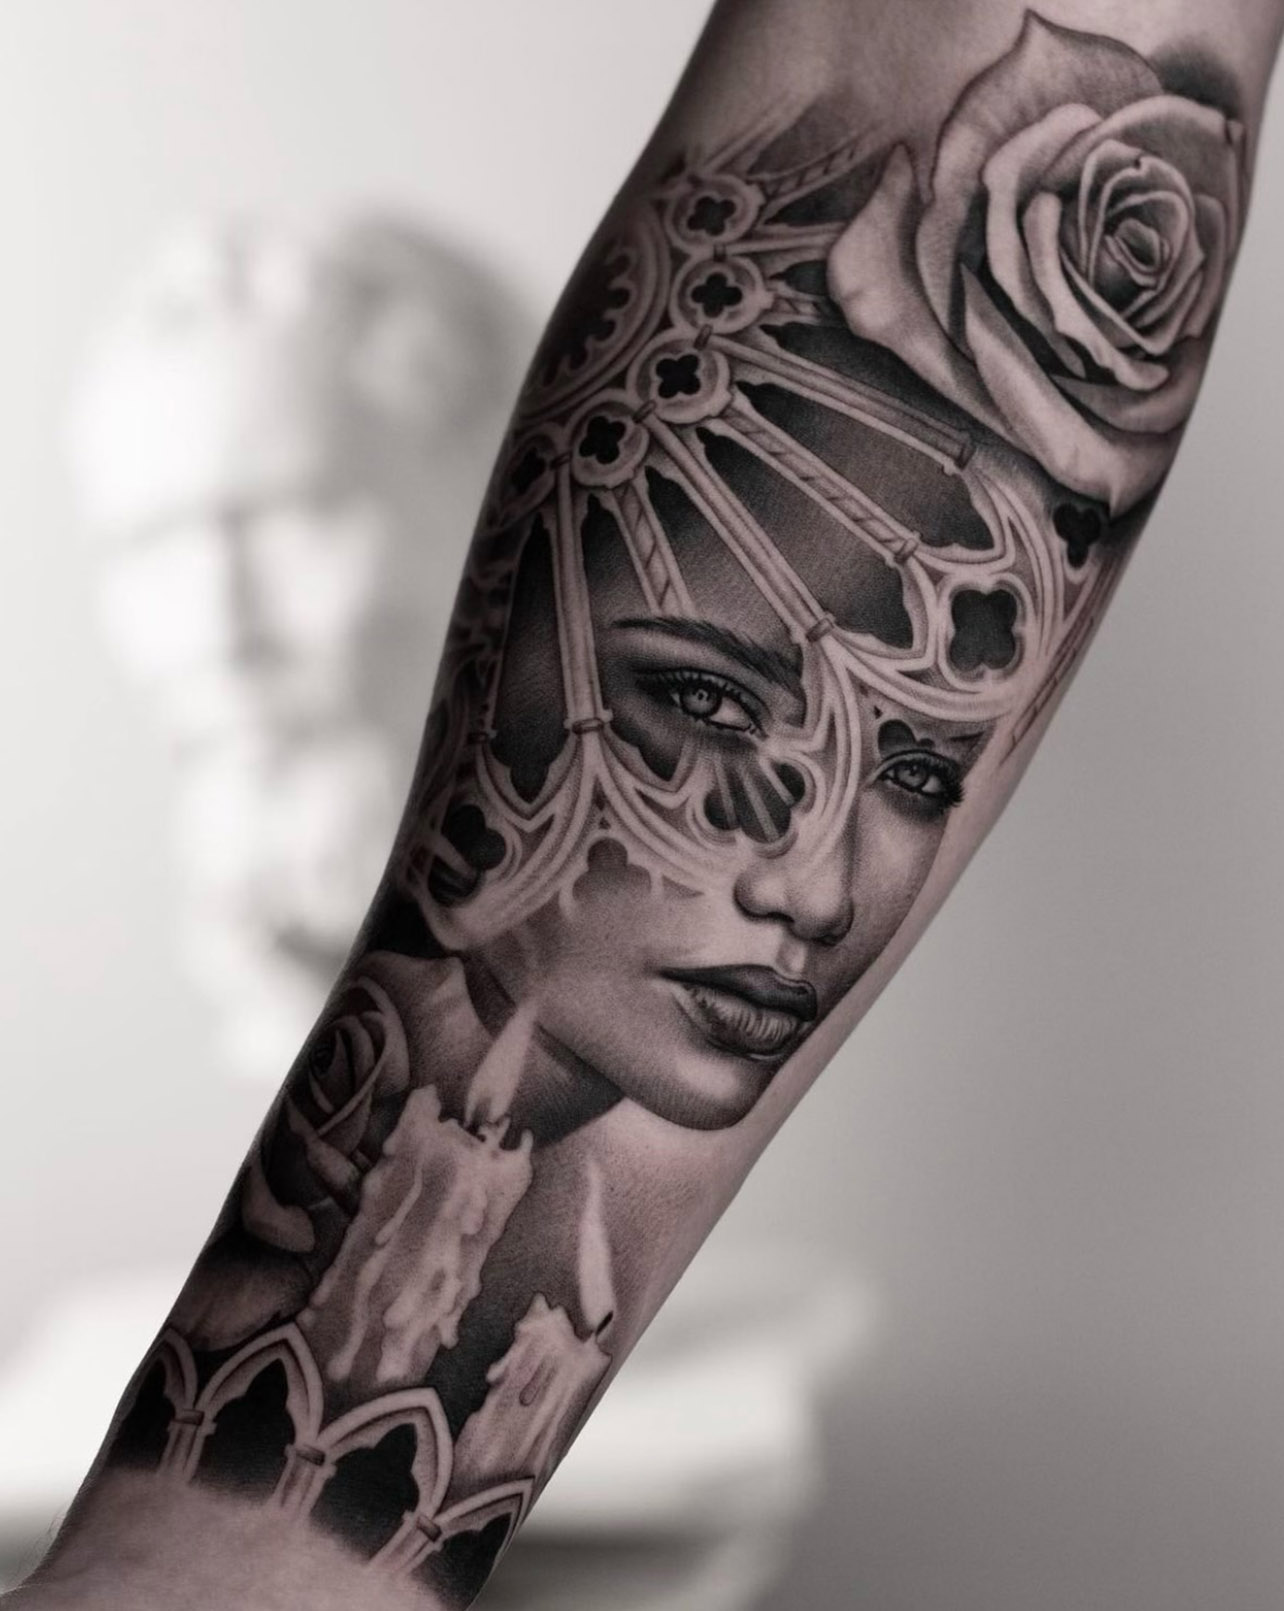 custom black and white tattoo by dan price, guest musecustom black and white tattoo by dan price, guest muse